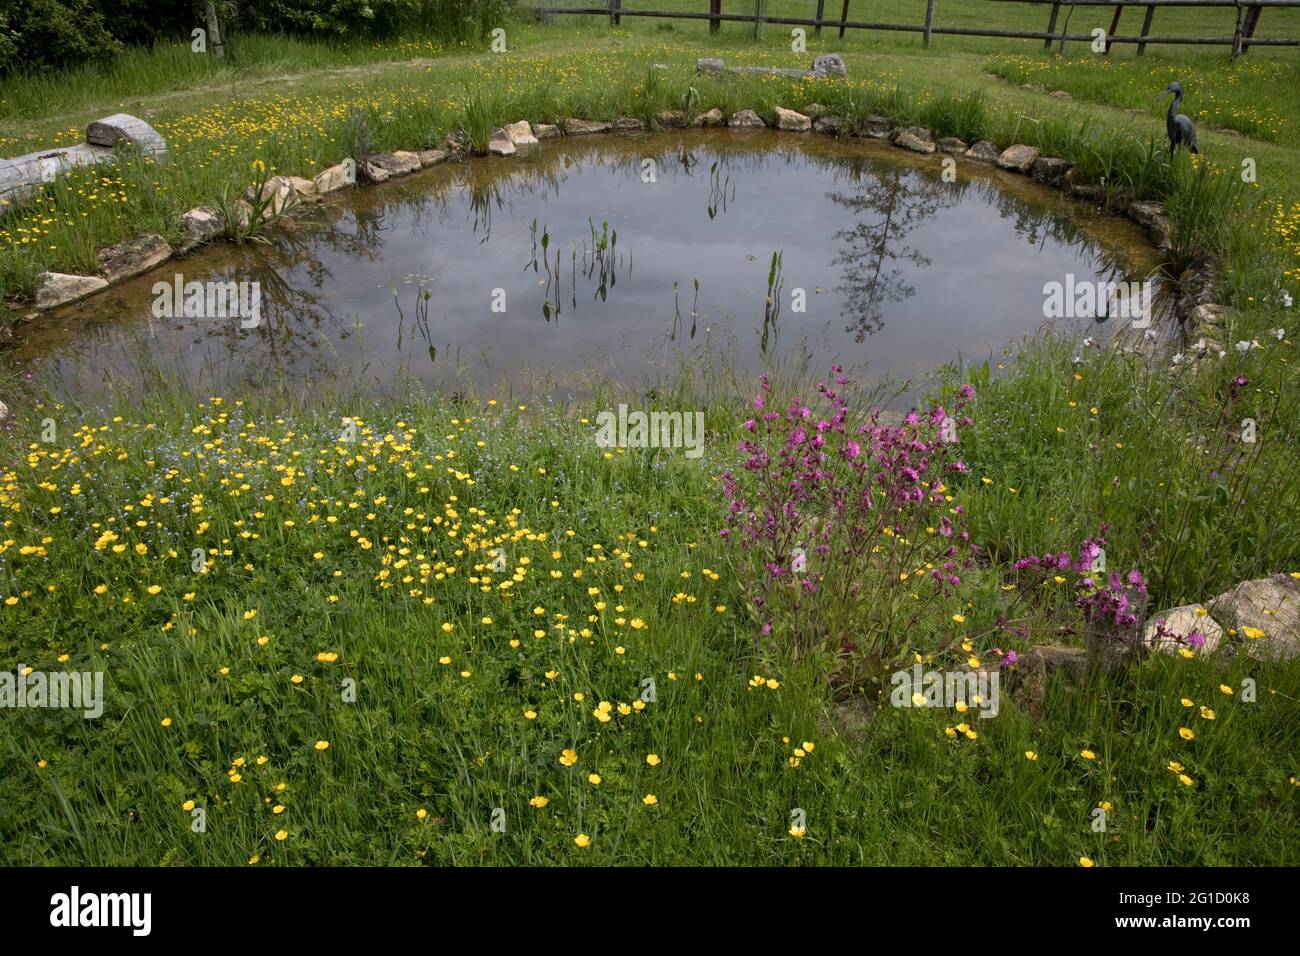 Large natural-looking man-made pond surrounded by wildflowers in grounds of ecohouse Mickleton Chipping Campden UK Stock Photo